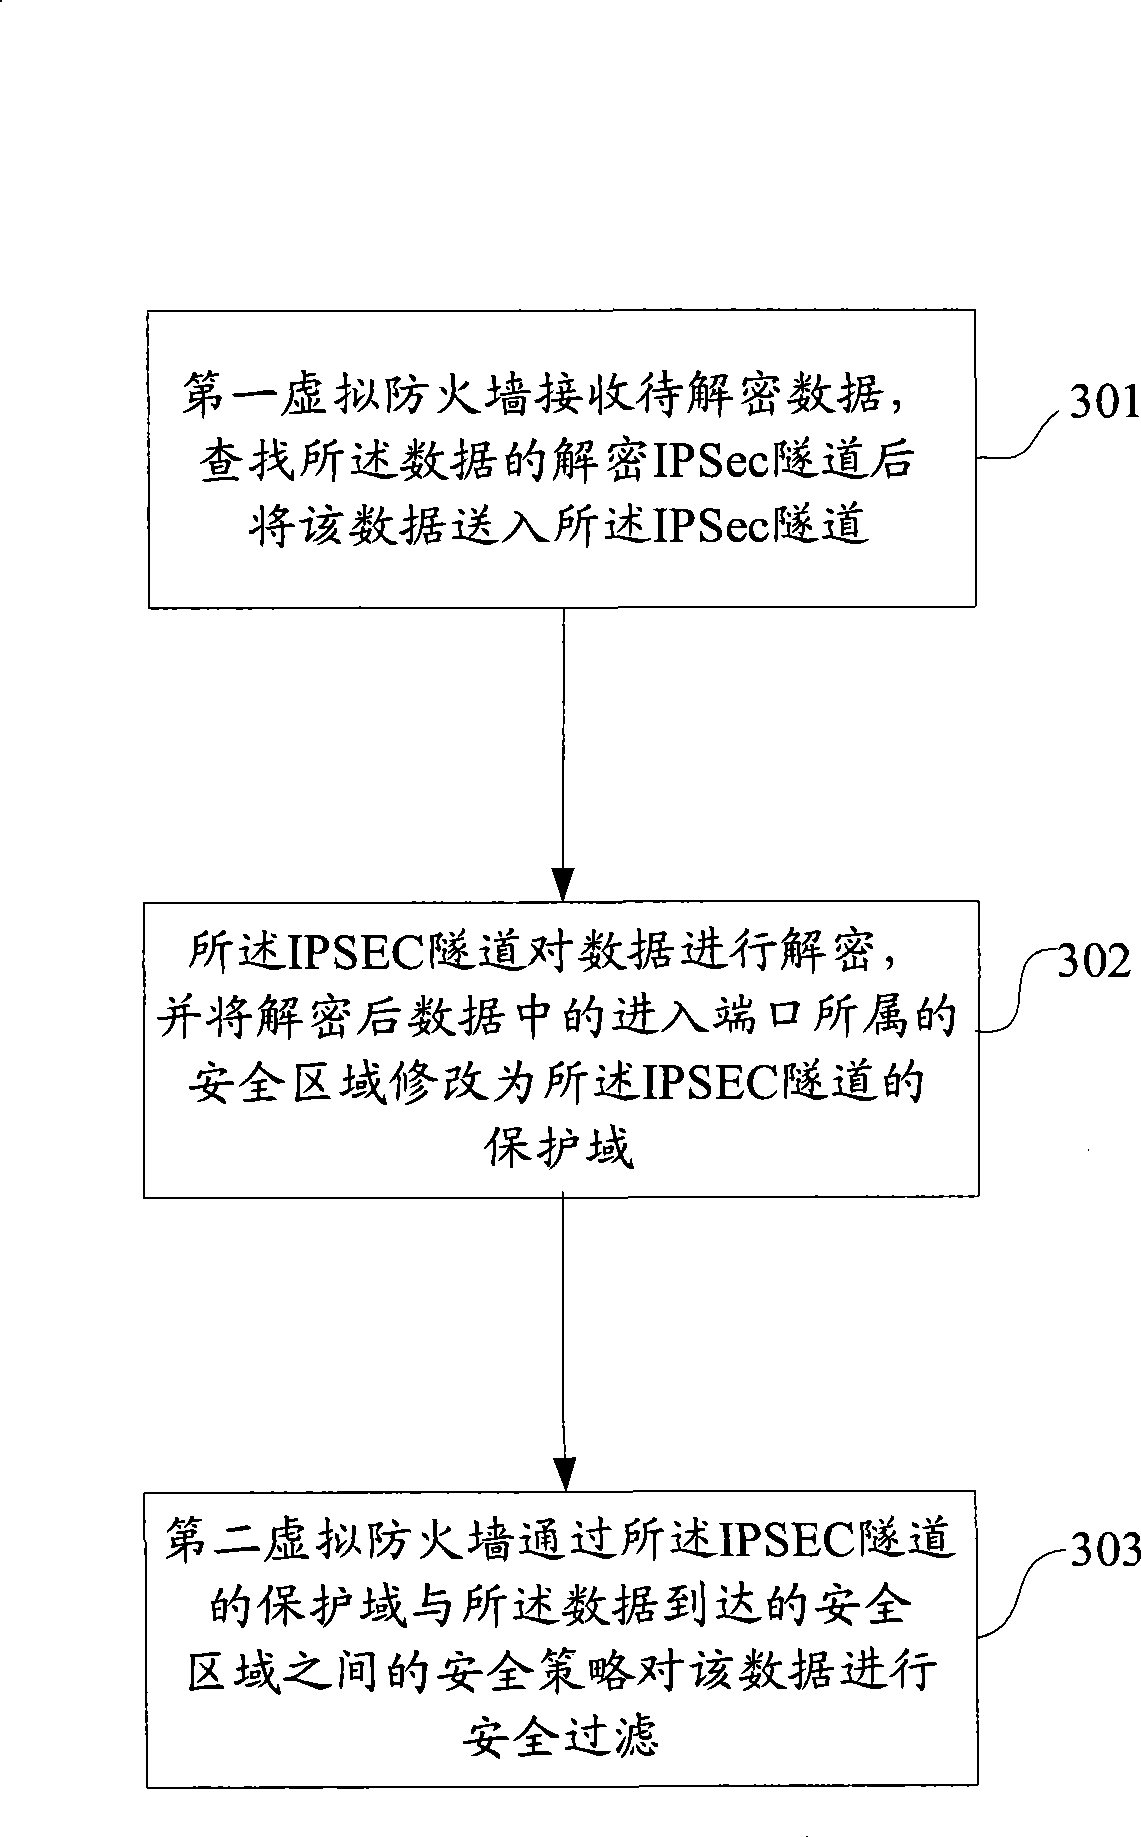 Method and system for transmitting and receiving data across virtual firewall